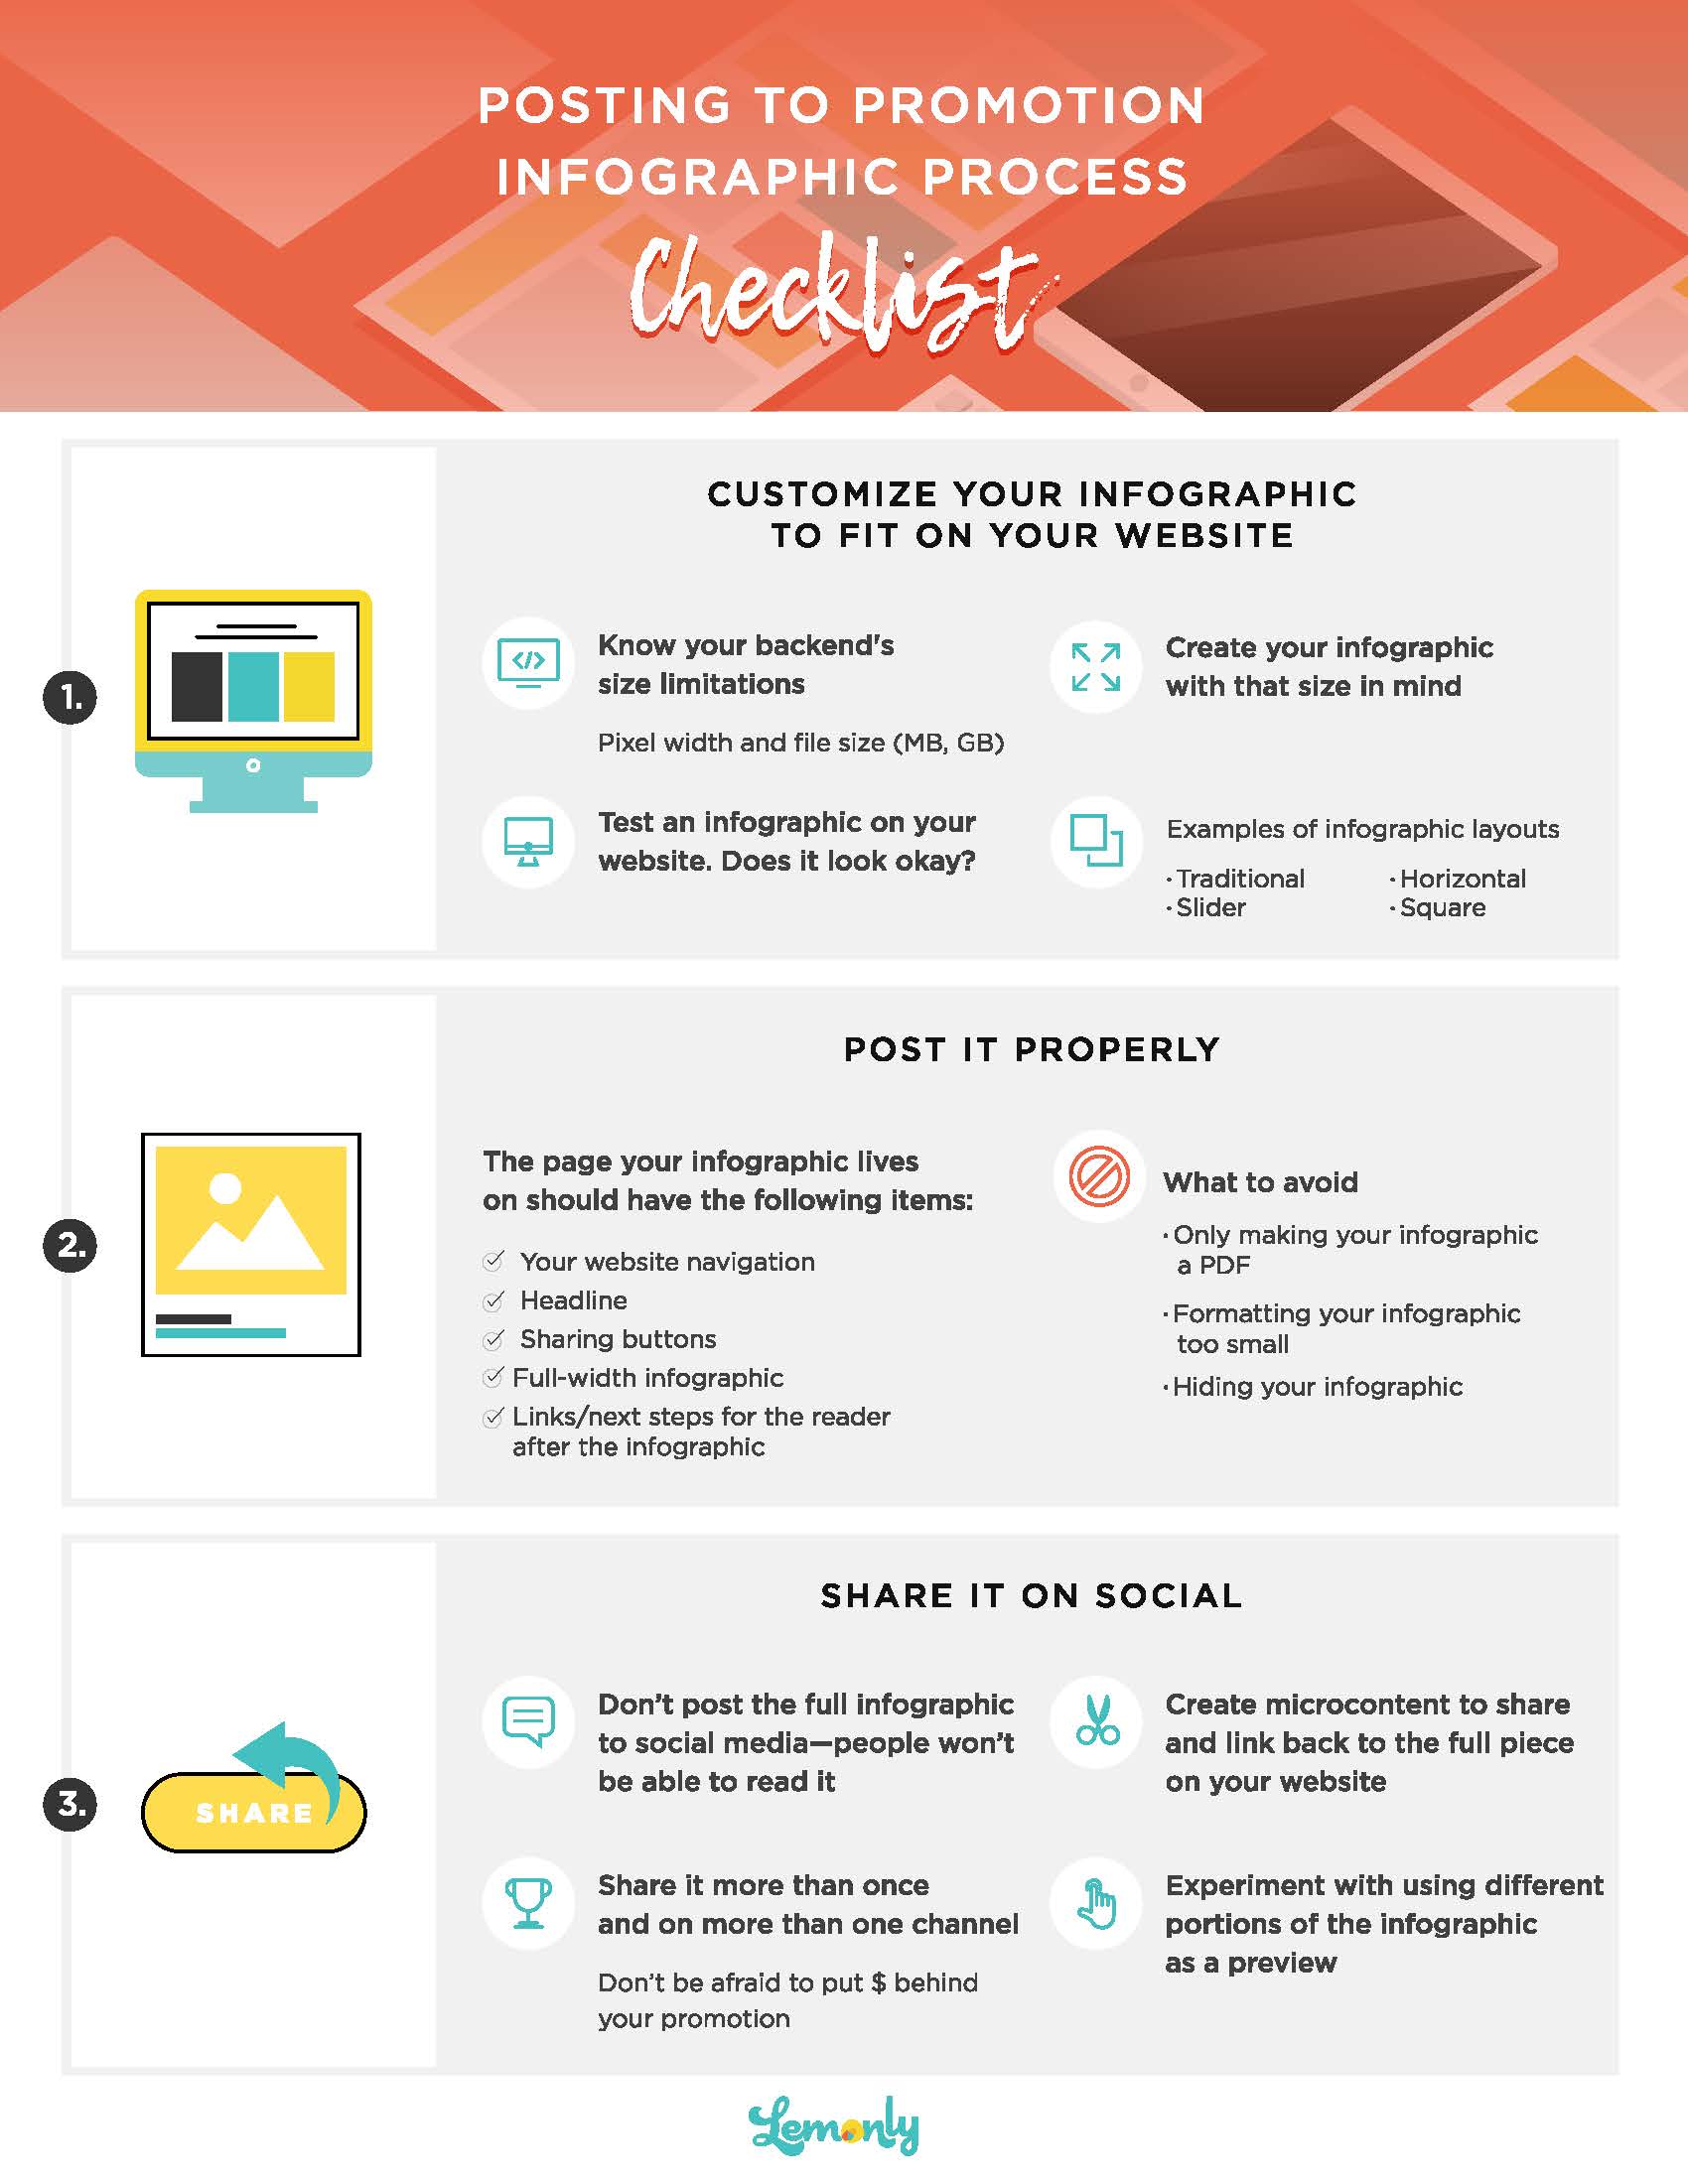 Infographic Posting to Promotion Checklist